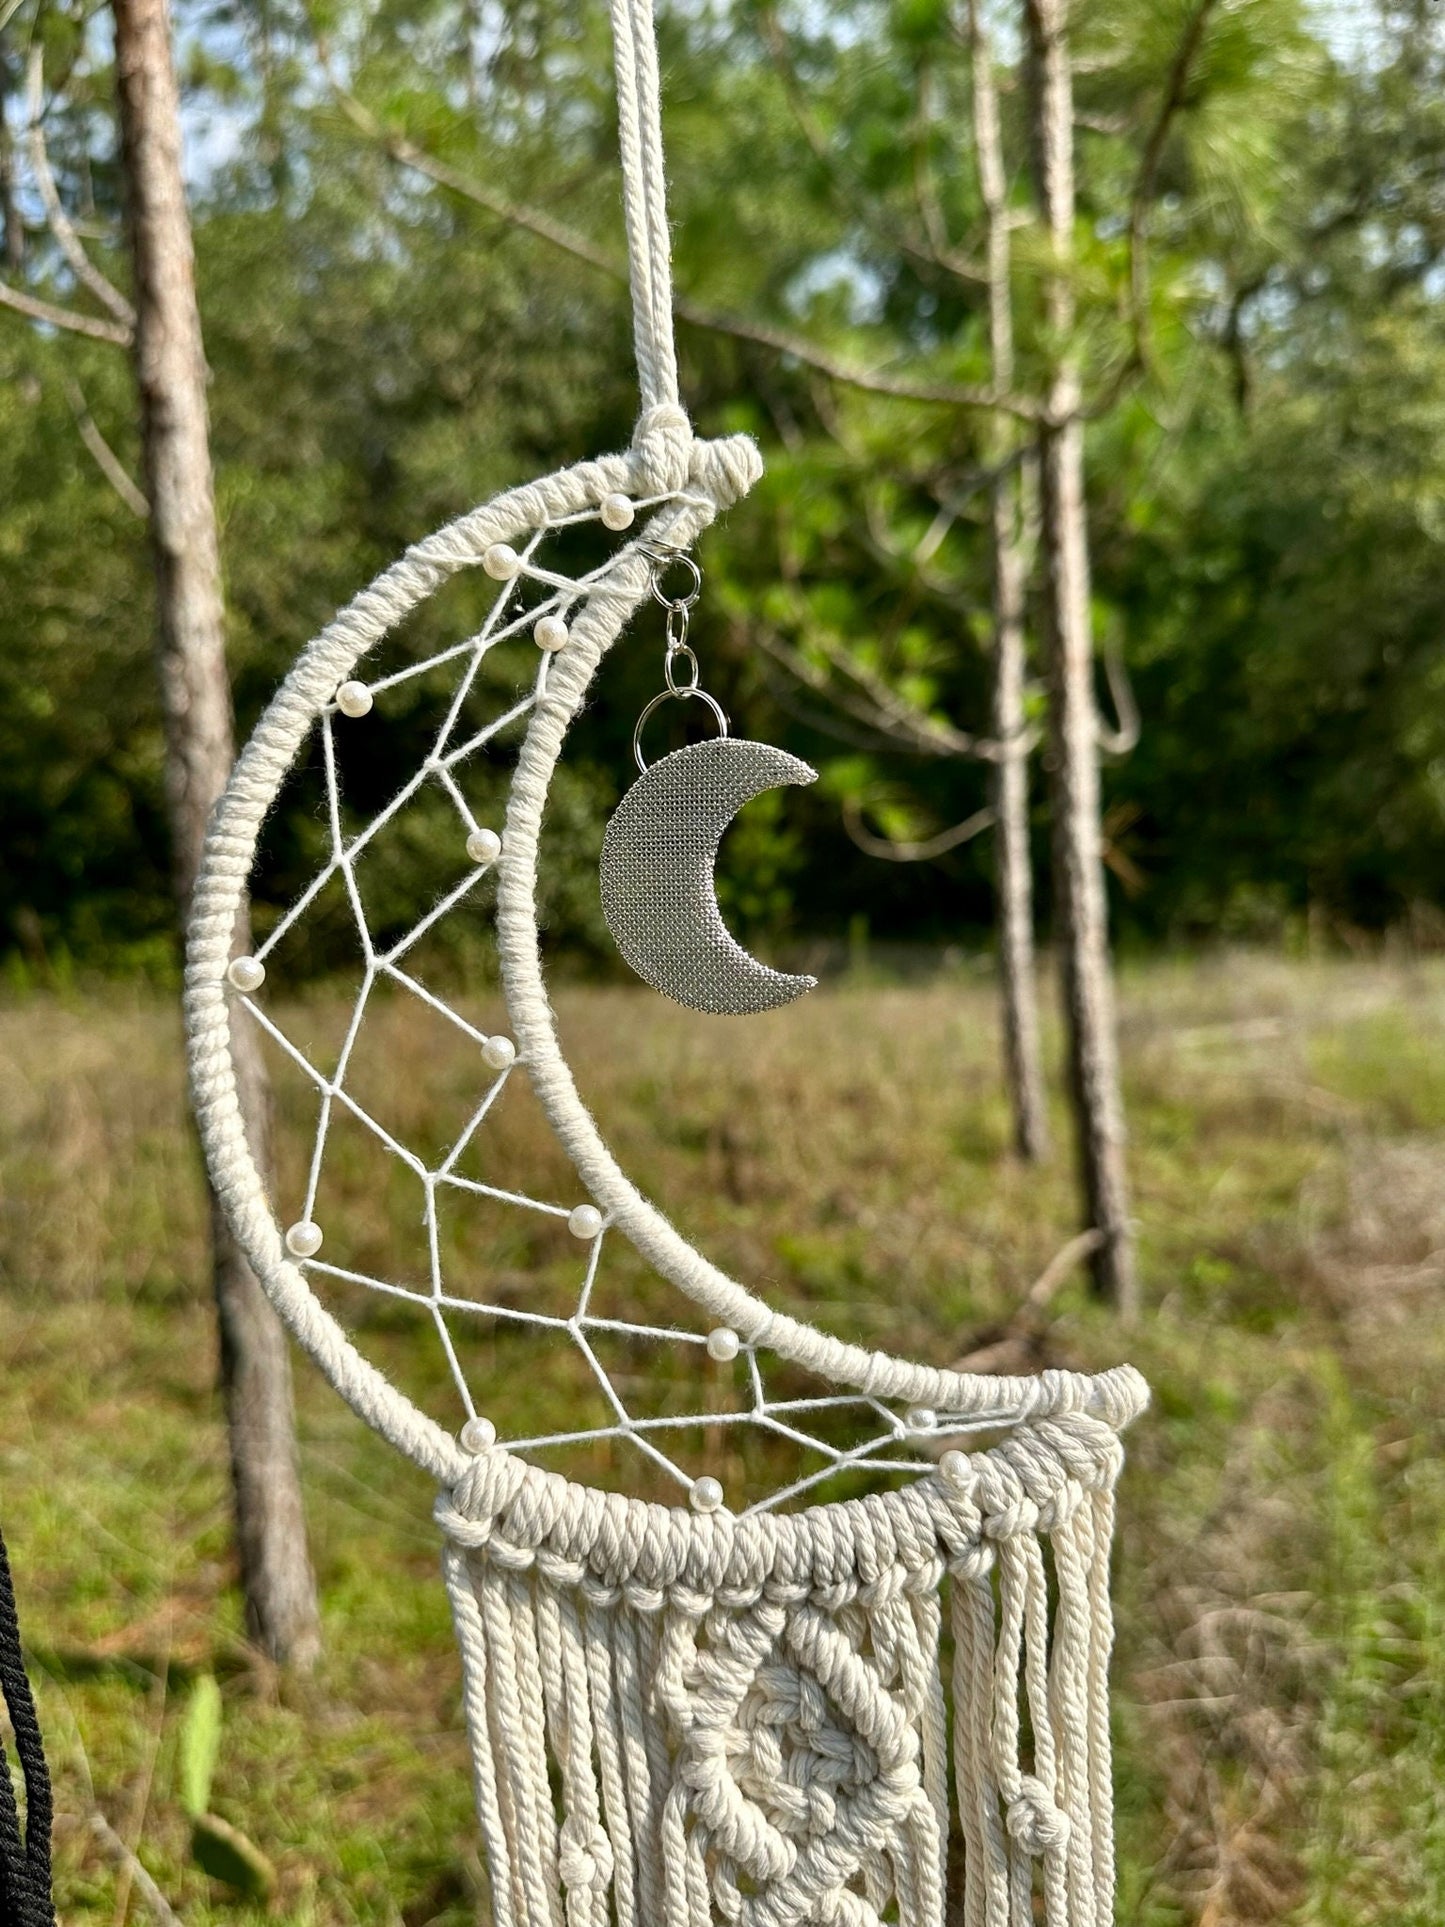 Macrame Wall Hanging Crescent Moon Dream Catcher with Moon Charm, Modern Boho Style Home Decor -- Black or Cream -- Quick Ship!